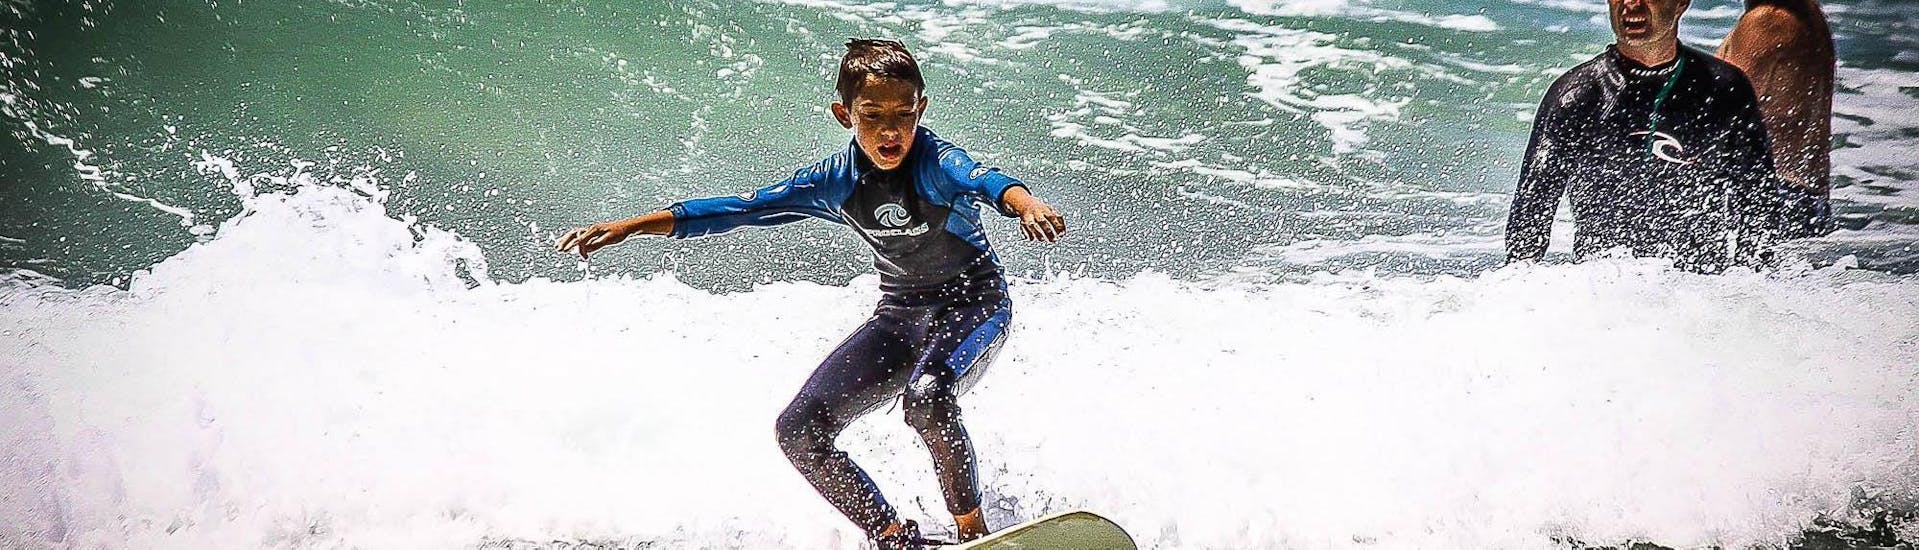 A young boy is having a great time during the Private Surfing Lesson in Jeffreys Bay for Kids & Adults with his surfing instructor from Wavecrest Surf School.